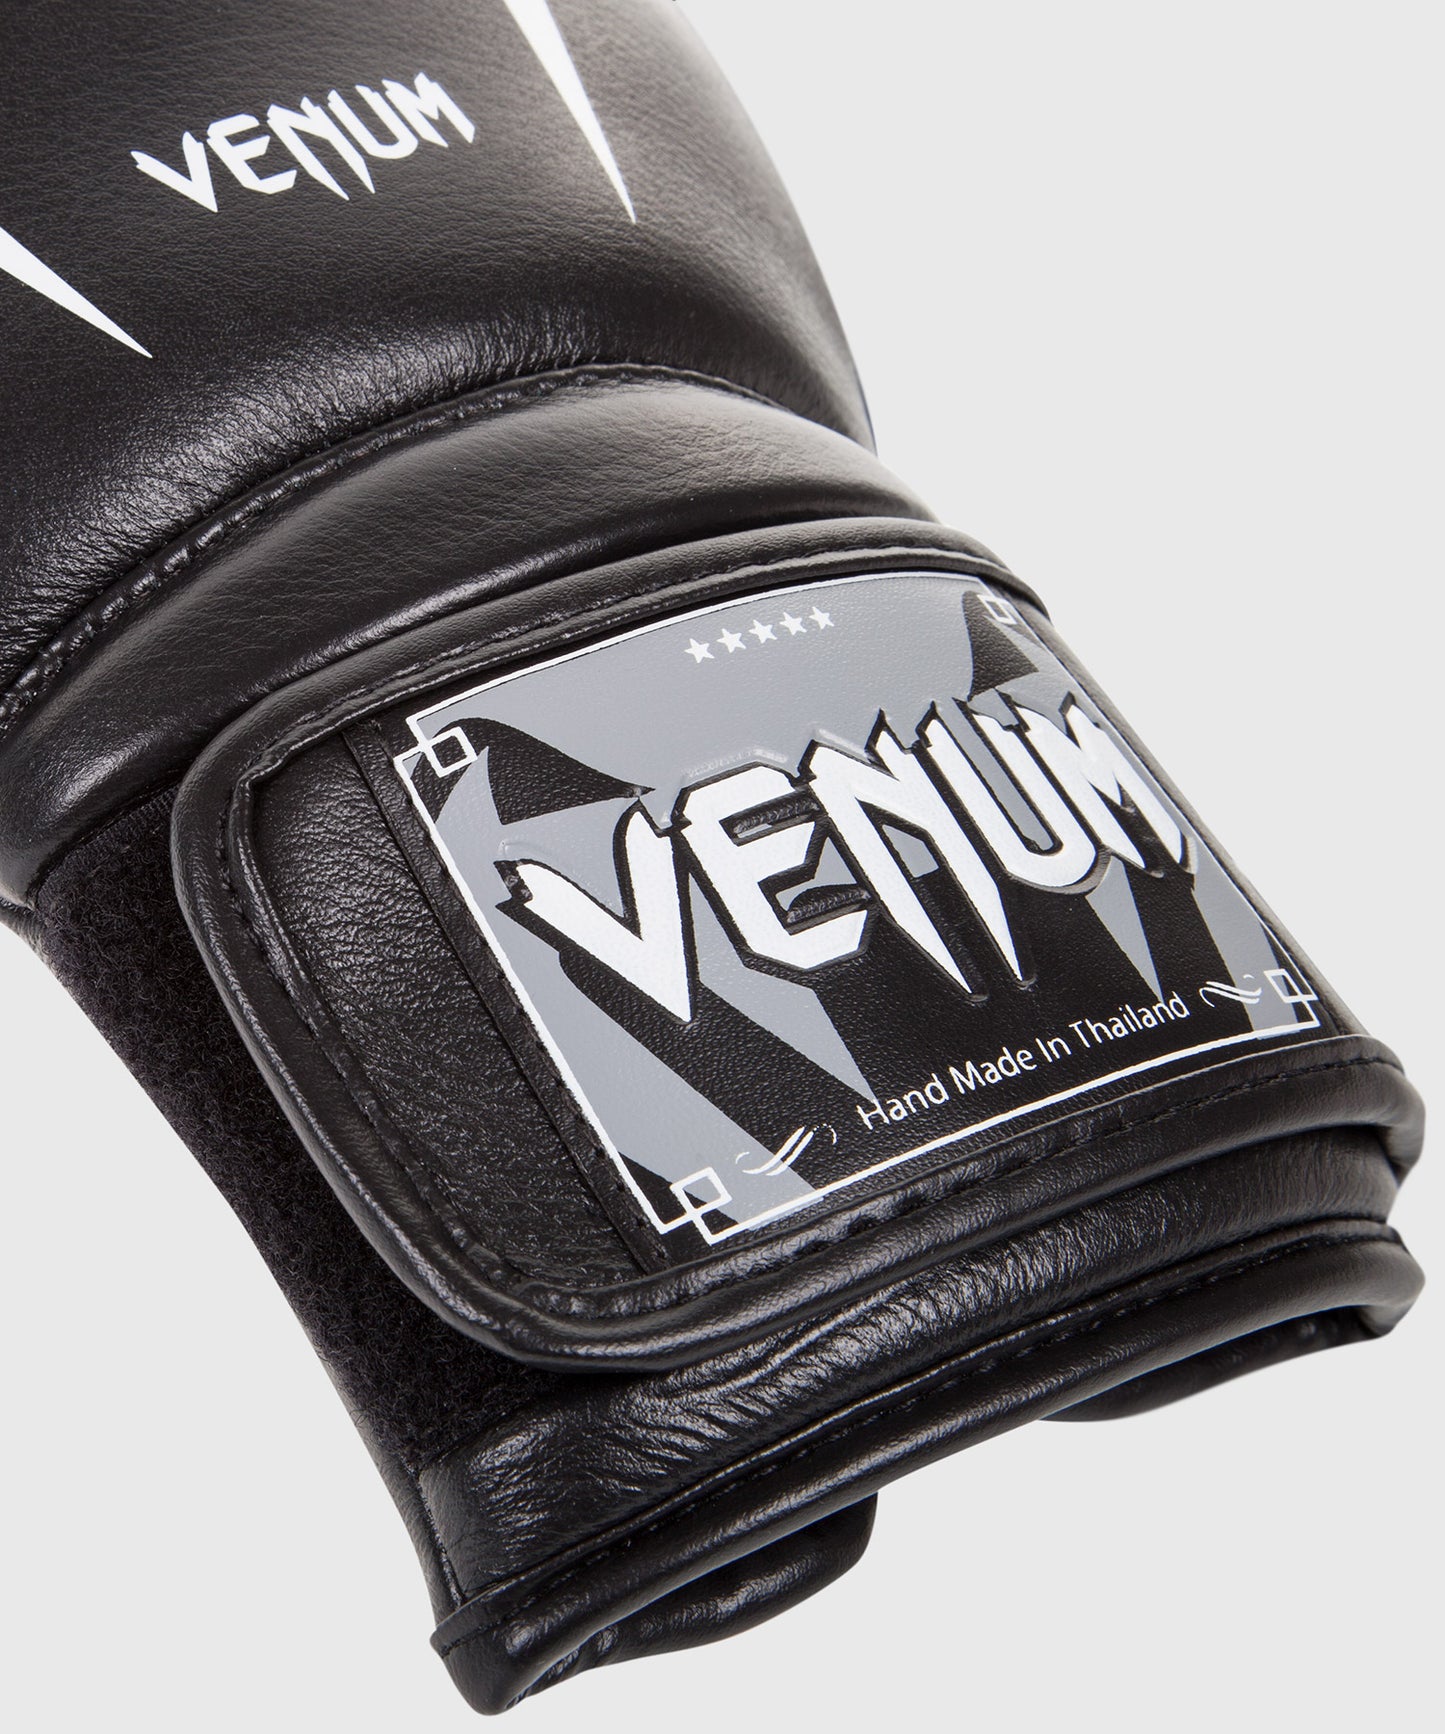 Venum Giant 3.0 Boxing Gloves - Nappa Leather